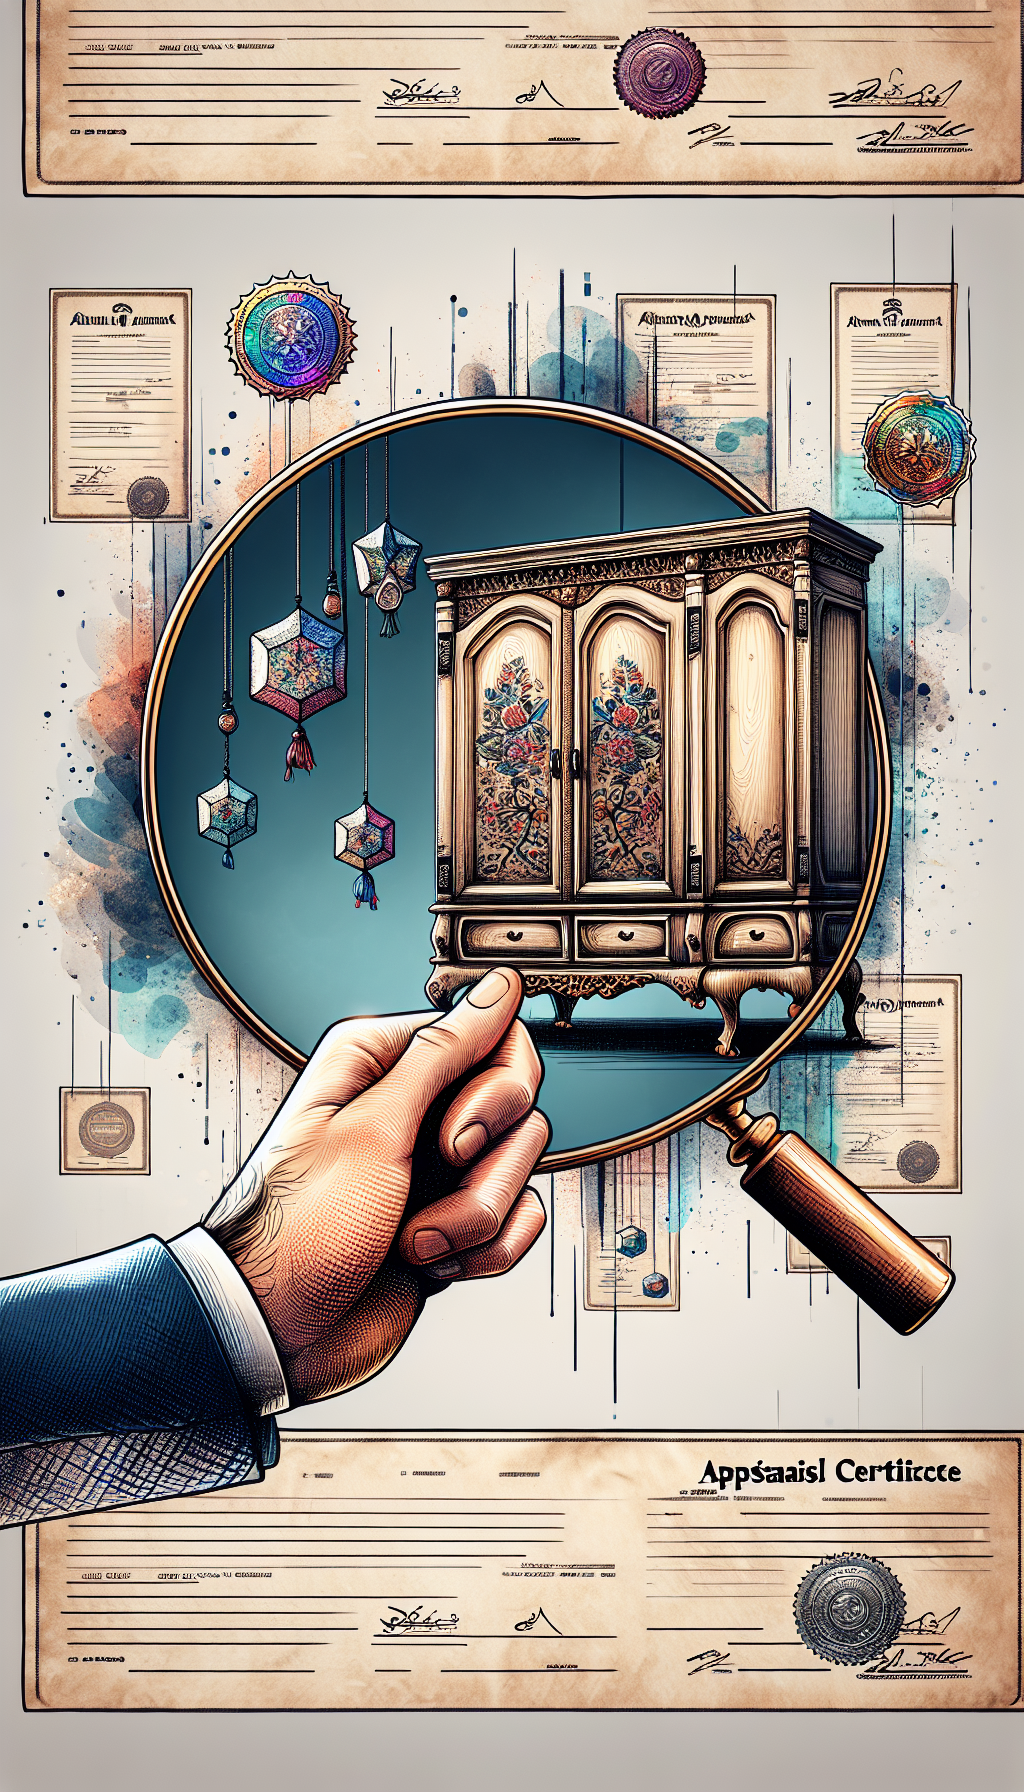 The illustration depicts an antique armoire under a magnifying glass held by an expert, with appraisal certificates and holographic authentication seals floating around. The armoire is intricately sketched in a realistic style, while the expert's hand is in bold line art, and the certificates shimmer in a whimsical, watercolor texture, symbolizing the blend of precision and value.